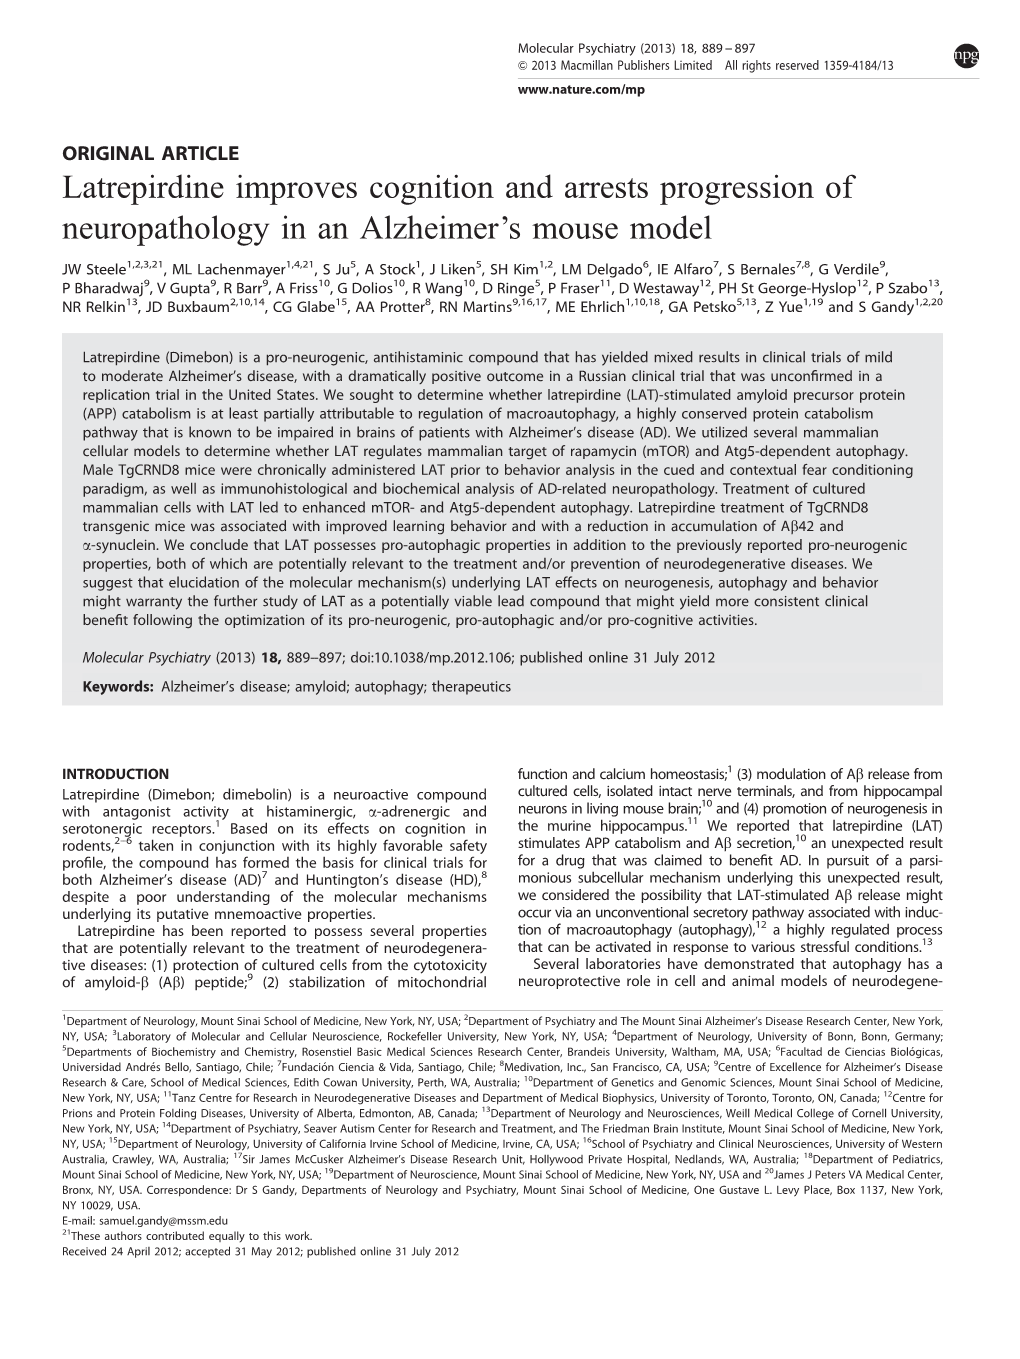 Latrepirdine Improves Cognition and Arrests Progression of Neuropathology in an Alzheimer’S Mouse Model